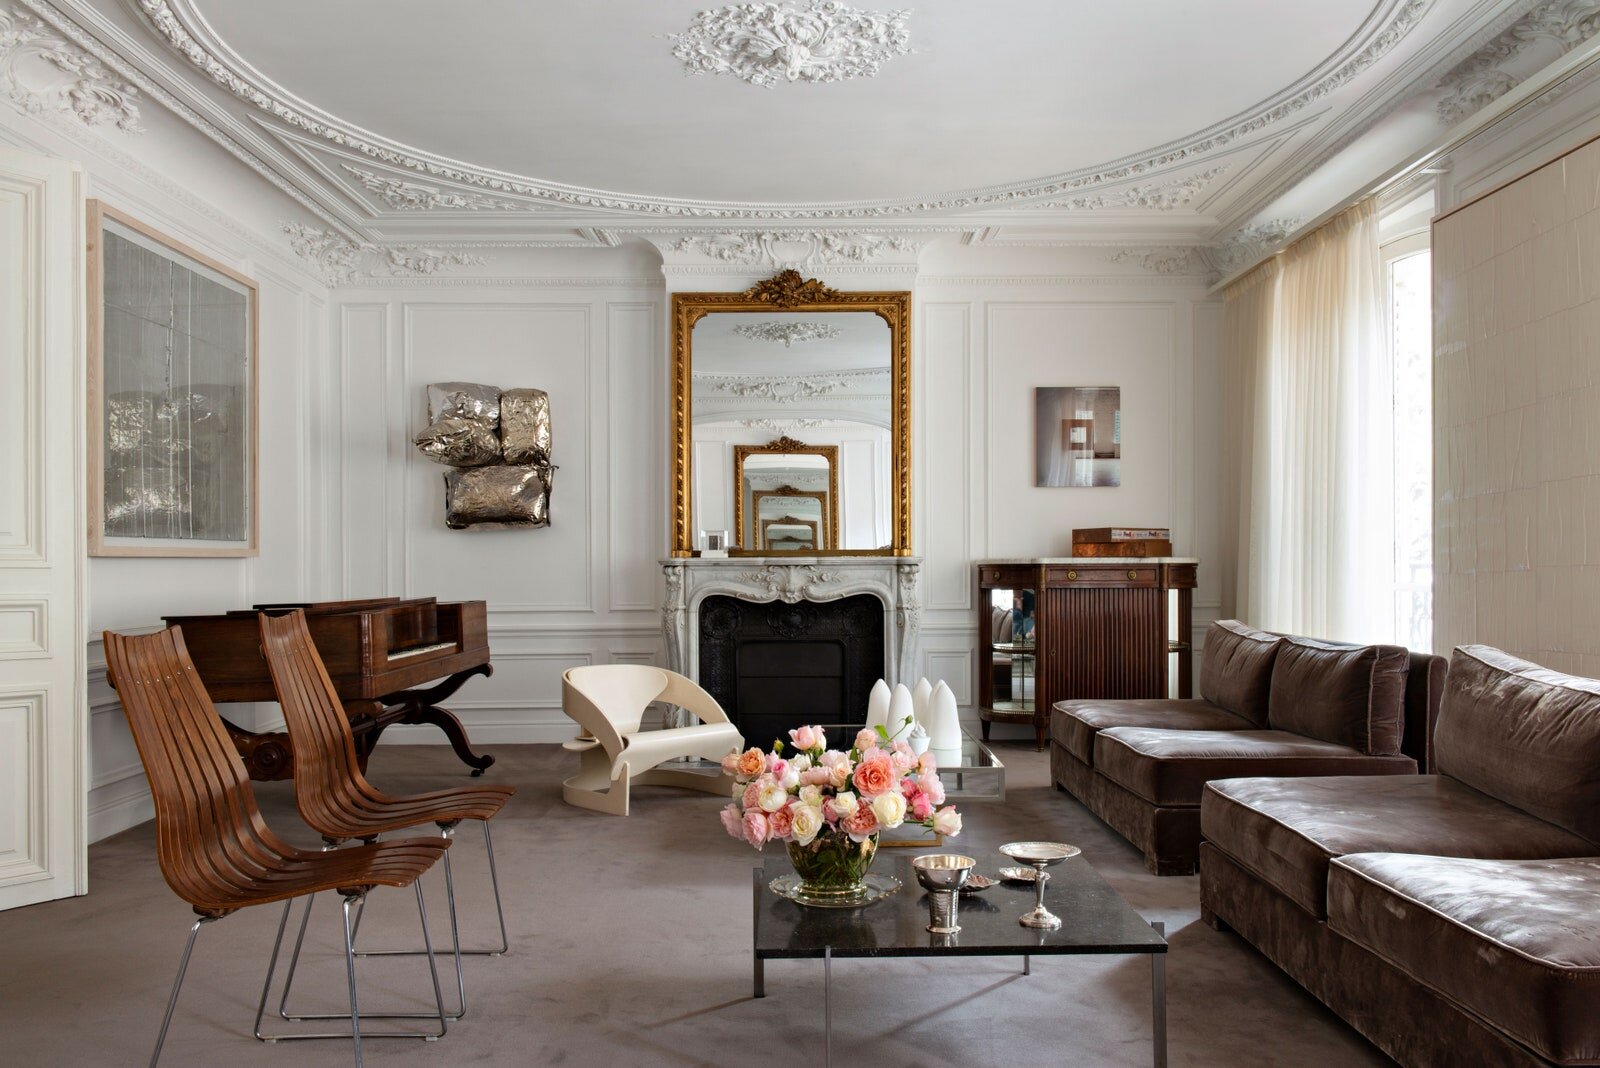 Today’s décor inspiration comes by way of this stunning 4-bedroom Paris apartment in a Haussmann-style building near the Arc de Triomphe. Decorated by French architect Benoit Dupuis for its Beirut-born inhabitant, the space includes the décor elements originally done by Parisian decorator Jean-Dominique Bonhotal, alongside midcentury pieces, contemporary works of art, as well as built-in closets and inner shutters designed by Dupuis. Other elements we love, of course, include the crown mouldings and boiserie…